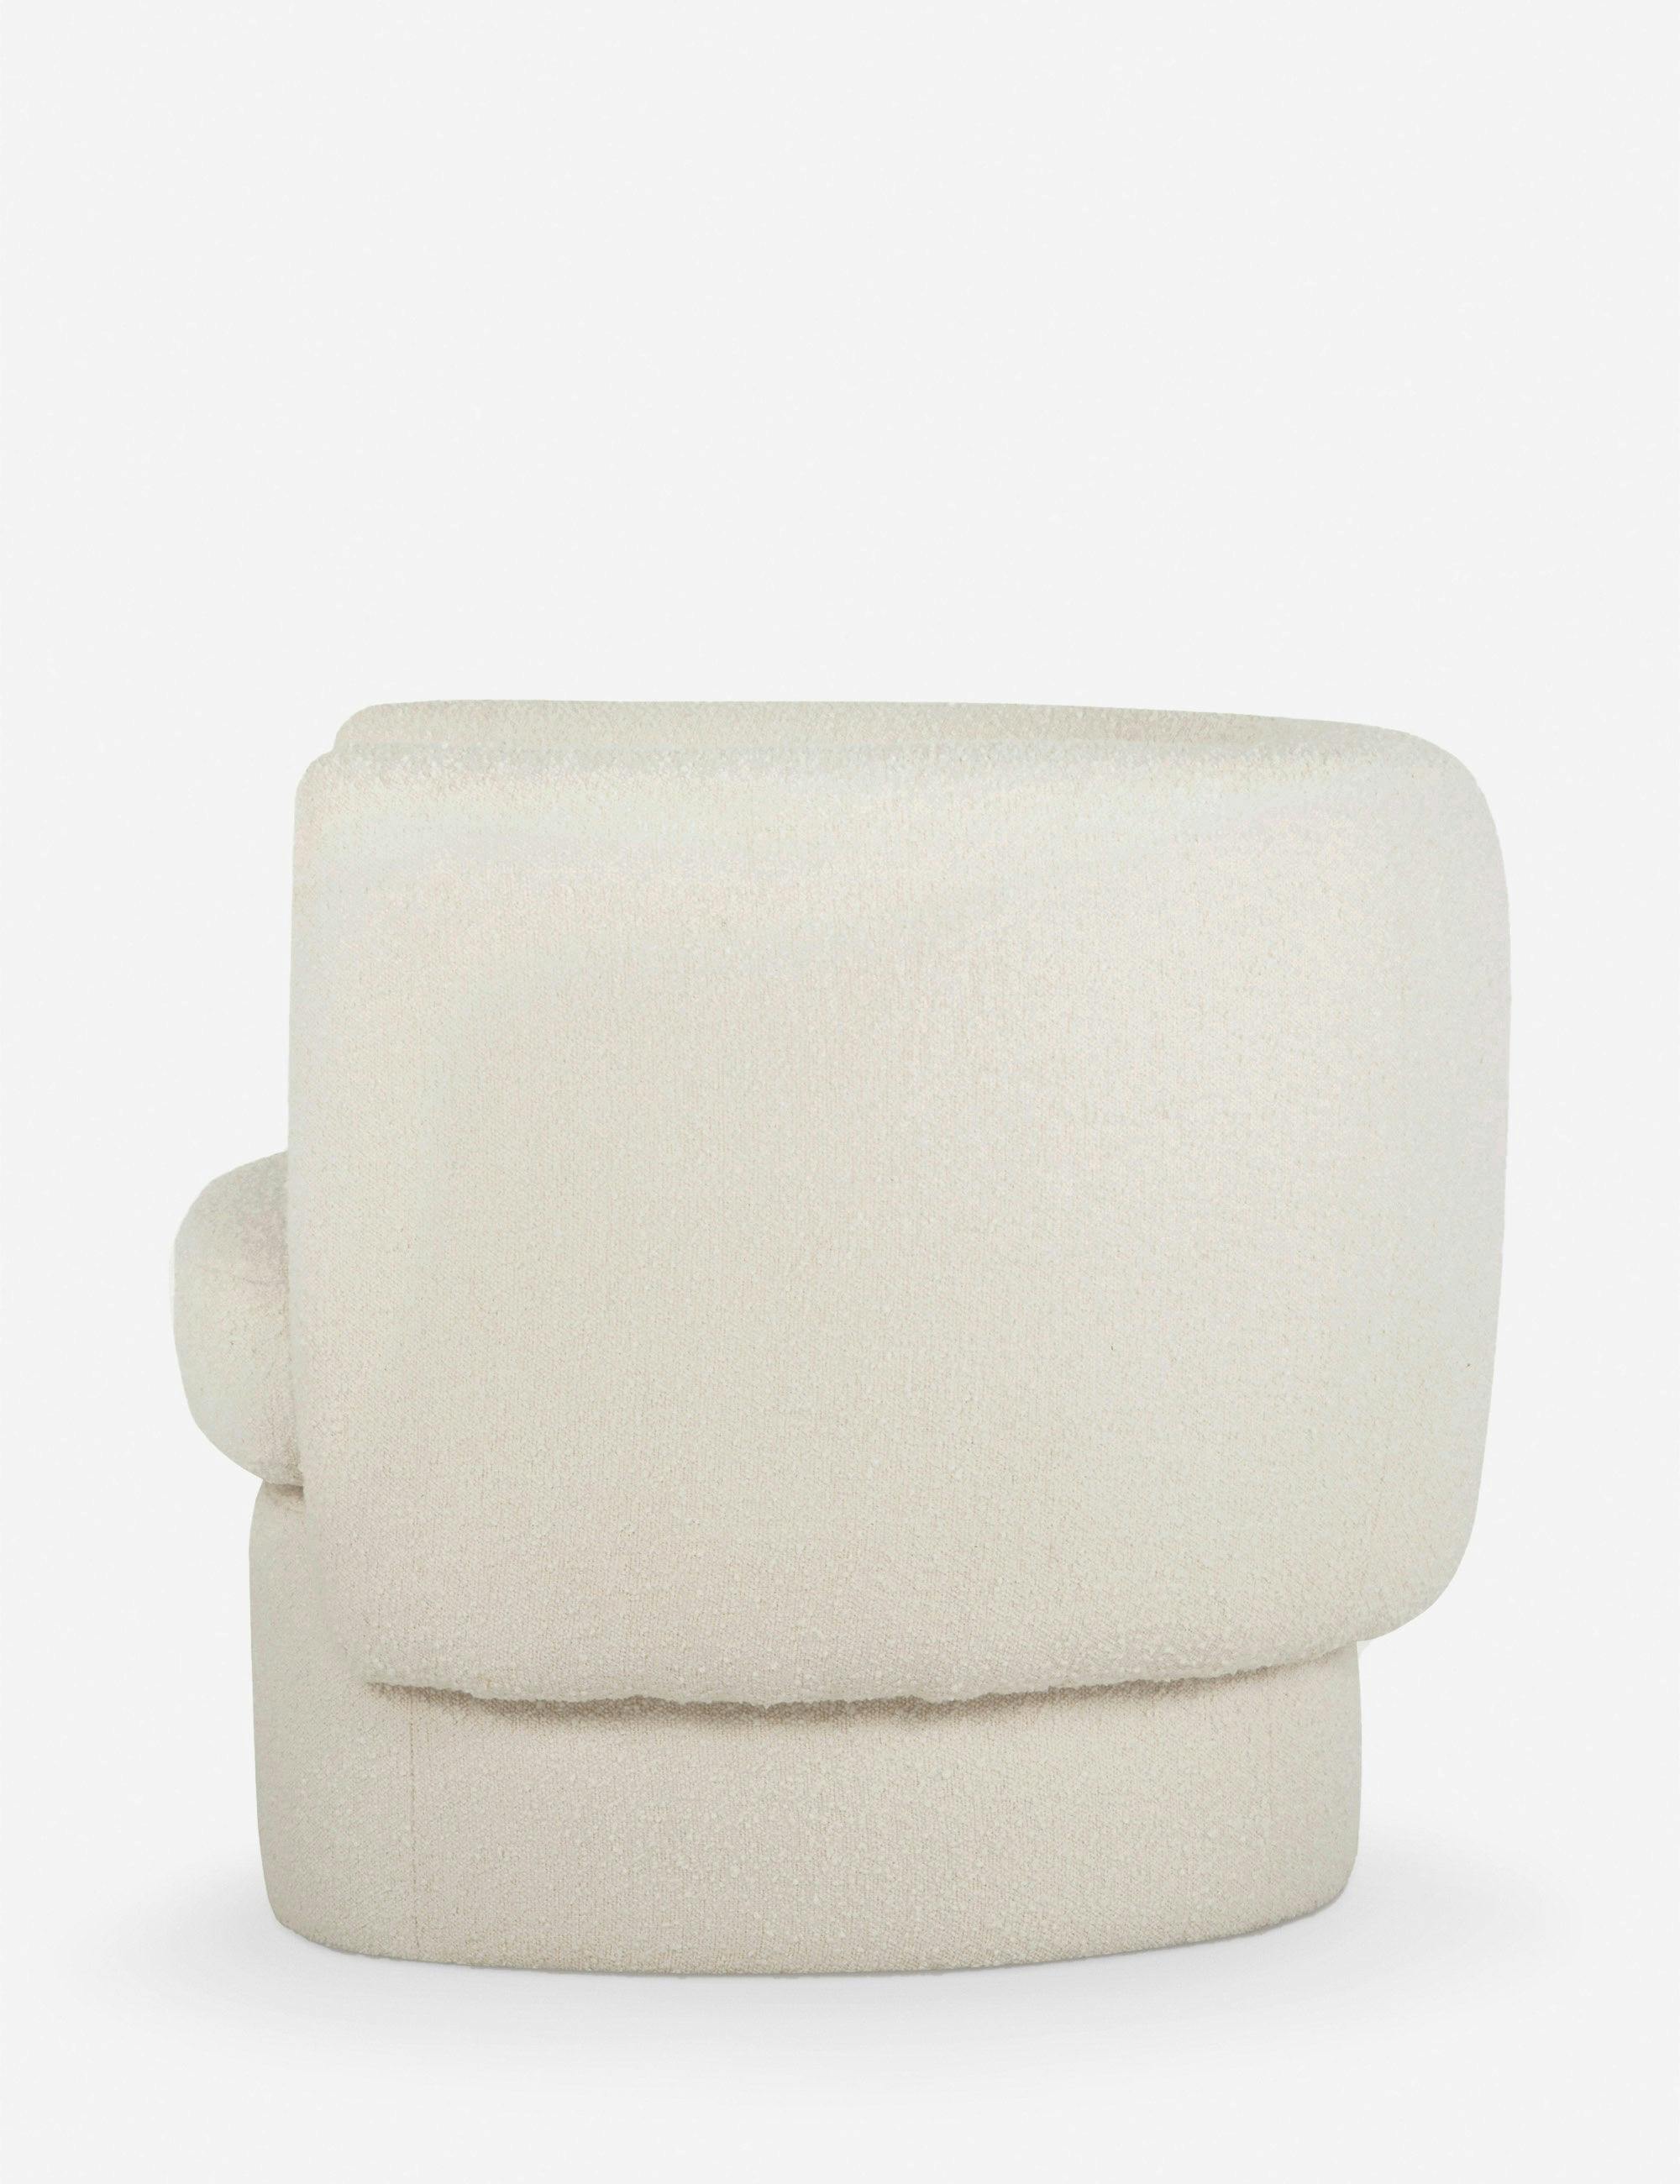 Maya White Curved Barrel Accent Chair with Foam Cushions